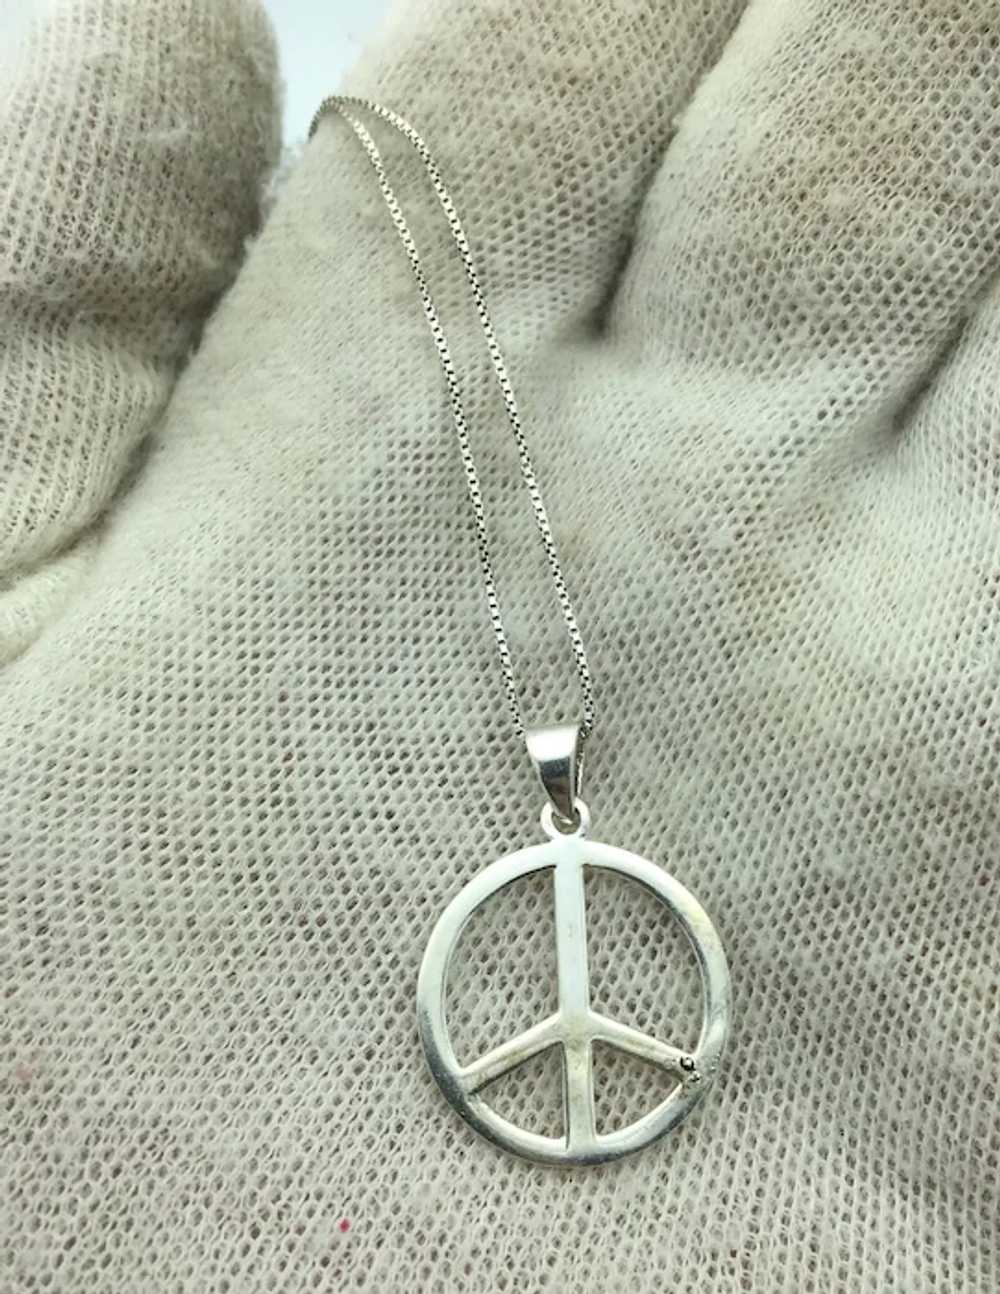 20" Sterling Silver Peace Symbol Necklace - image 2